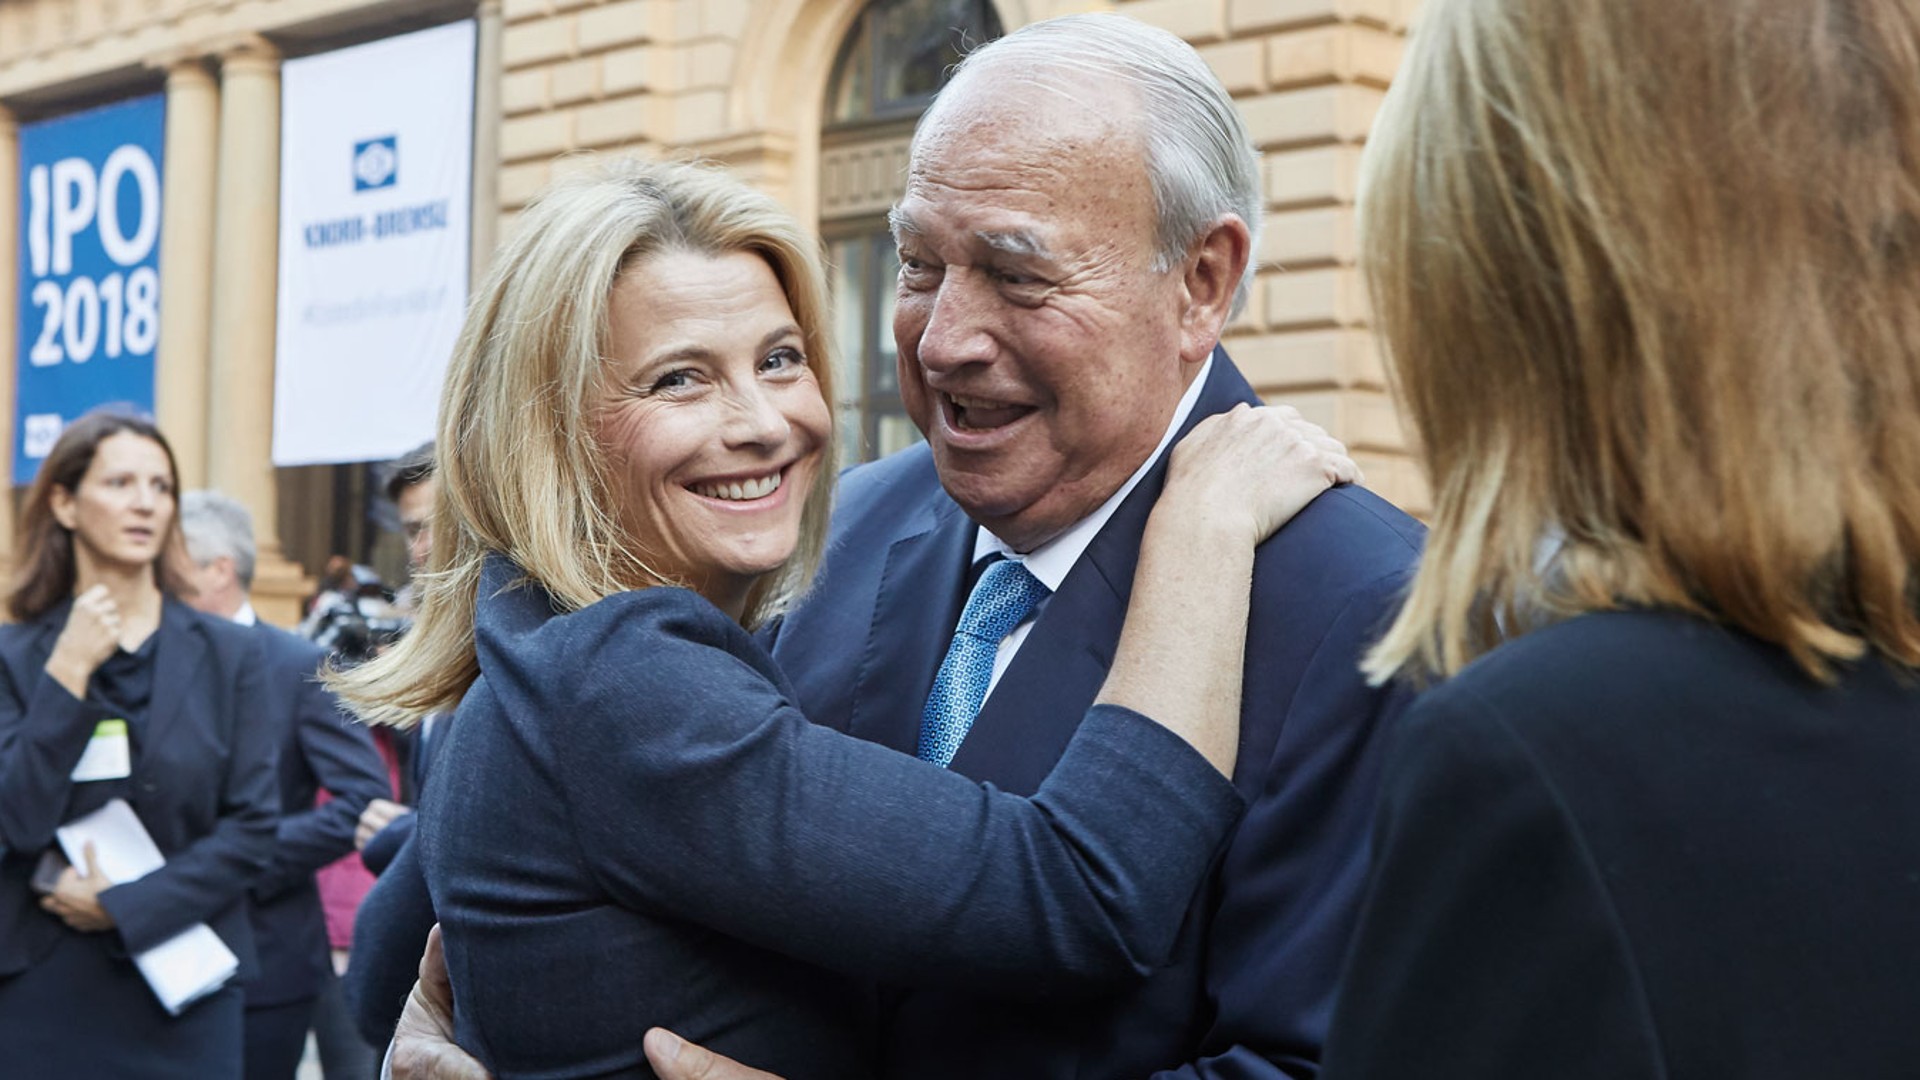 After the stock market launch of the Knorr-Bremse share, Heinz Hermann Thiele beamingly embraces his daughter Julia in front of the Frankfurt Stock Exchange.